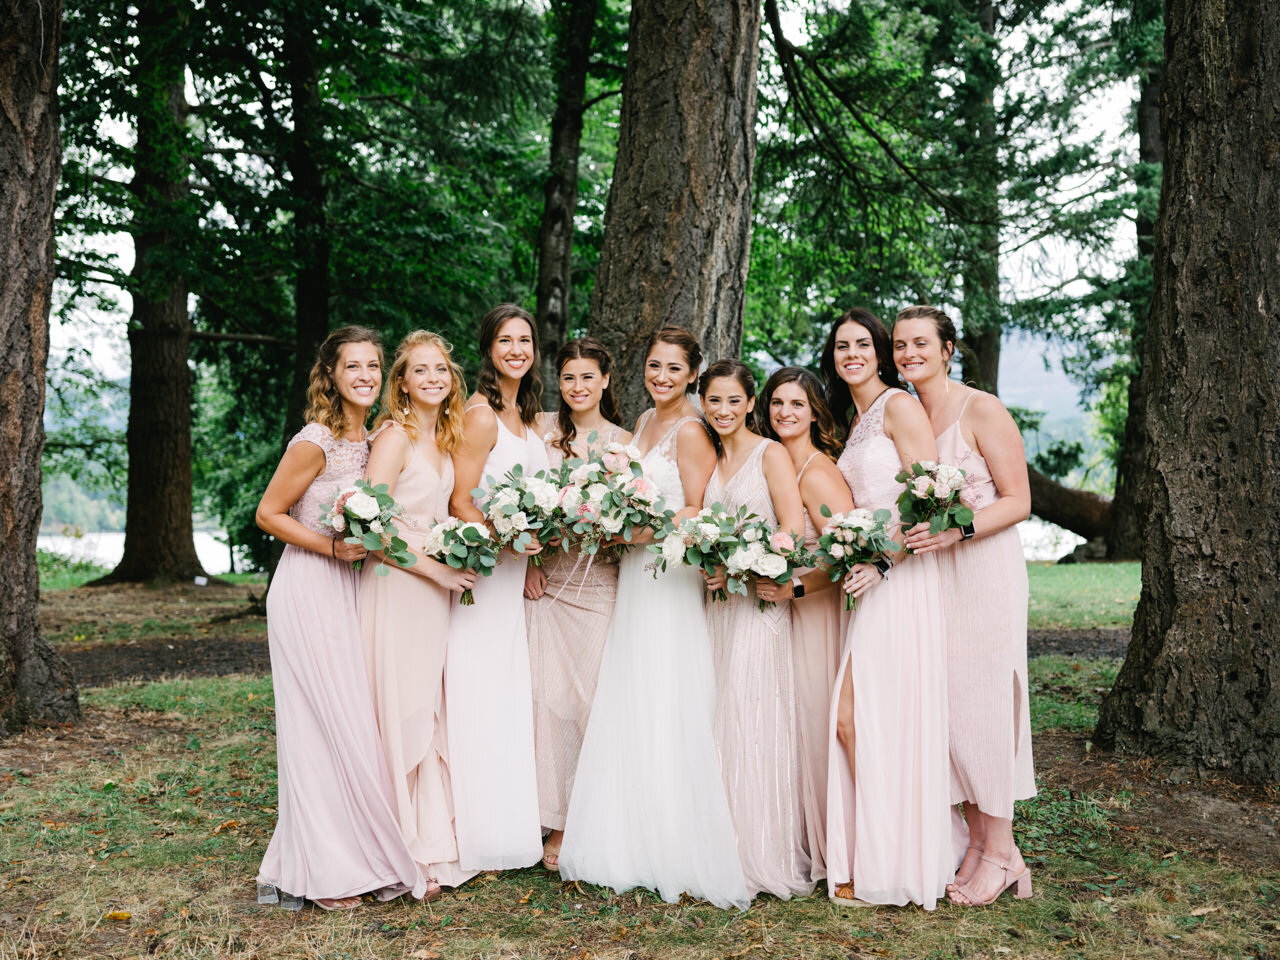  Bride and bridesmaid portrait in large fir trees, with bridesmaids dressed in peach and pink 